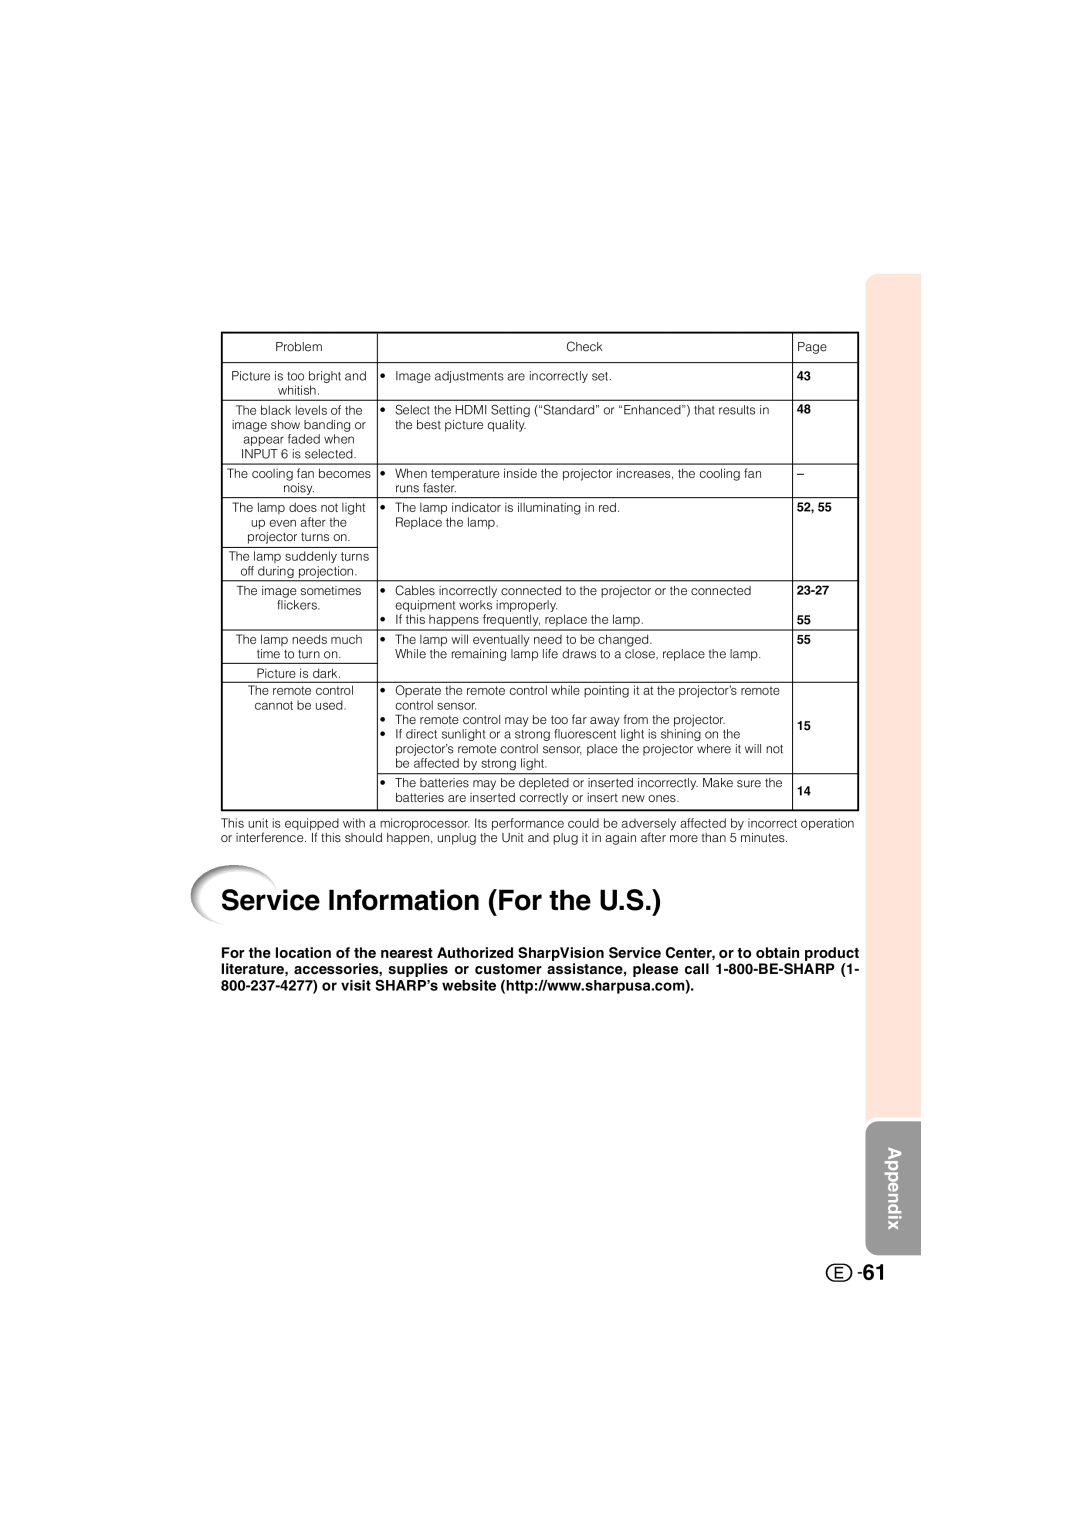 Sharp XV-Z3000U Service Information For the U.S, Appendix, 23-27, The black levels of the, INPUT 6 is selected, noisy 